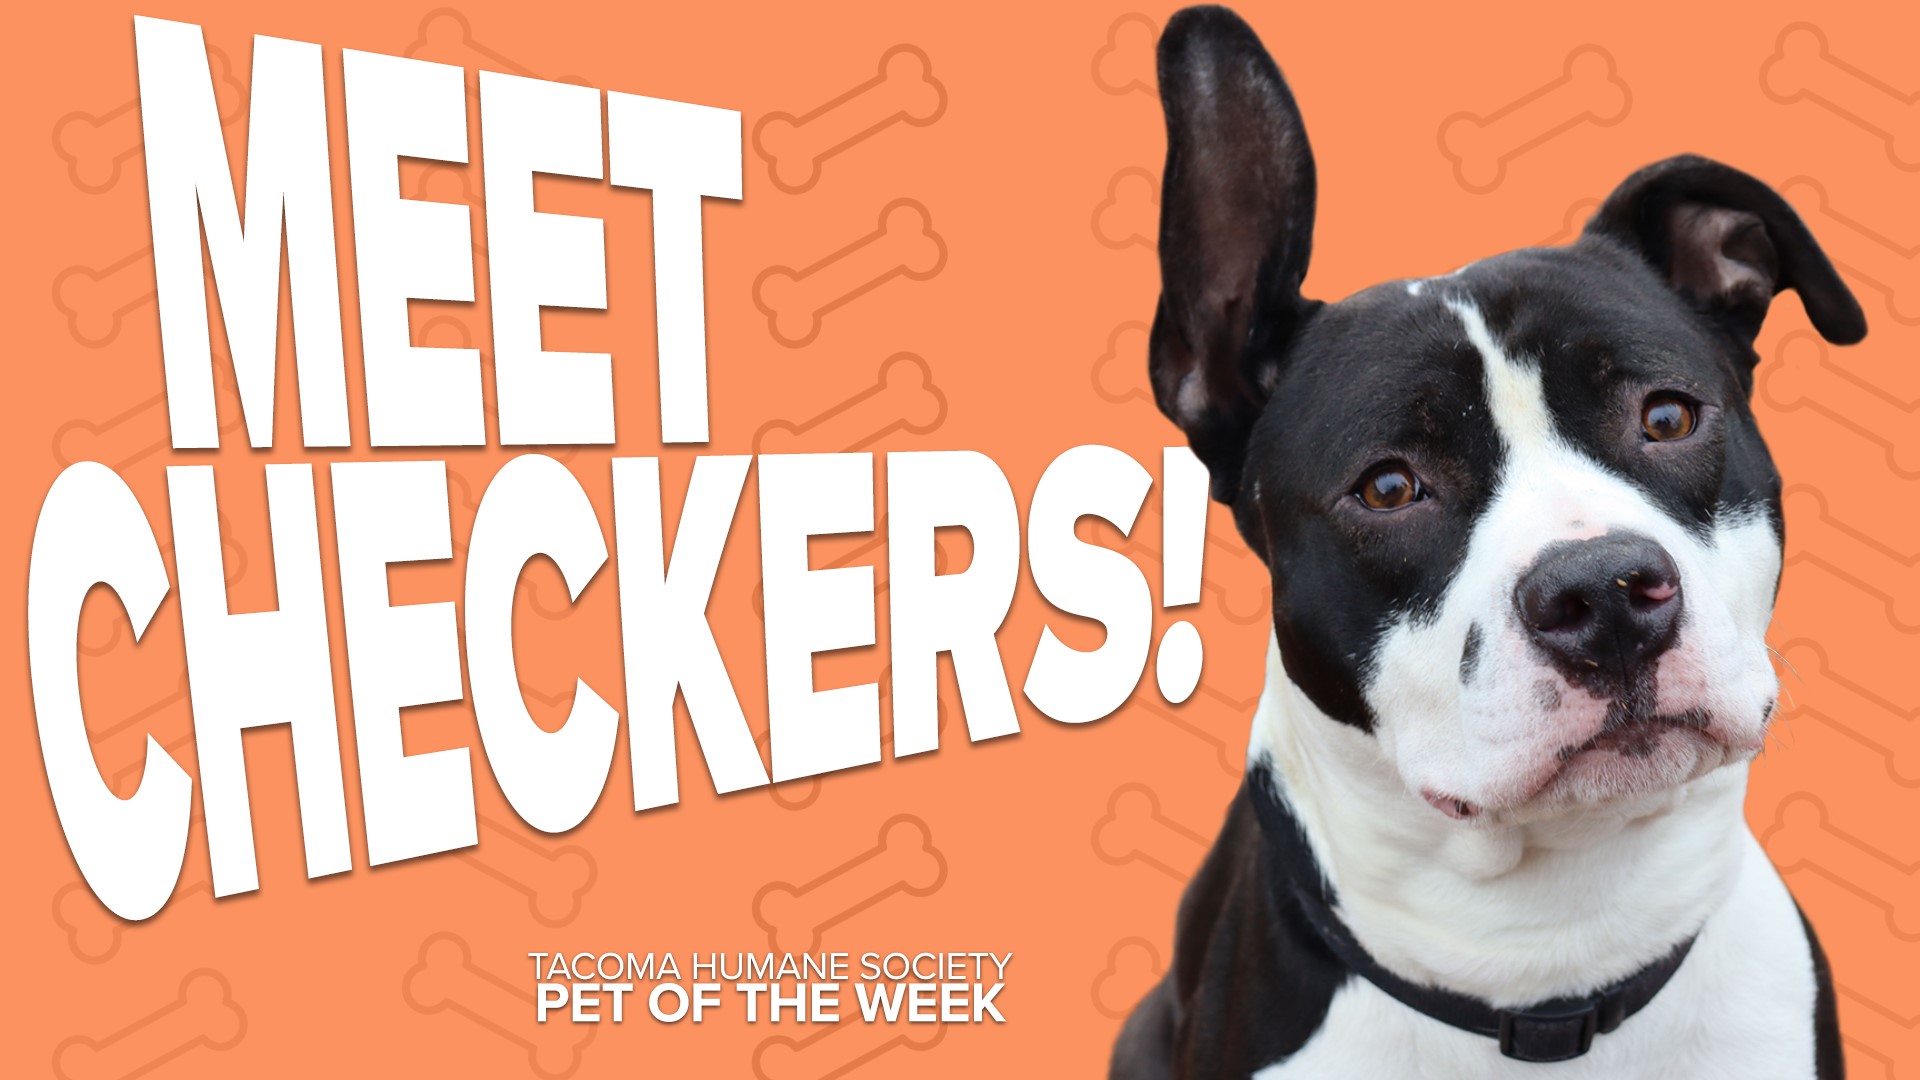 This week's featured adoptable pet is Checkers!